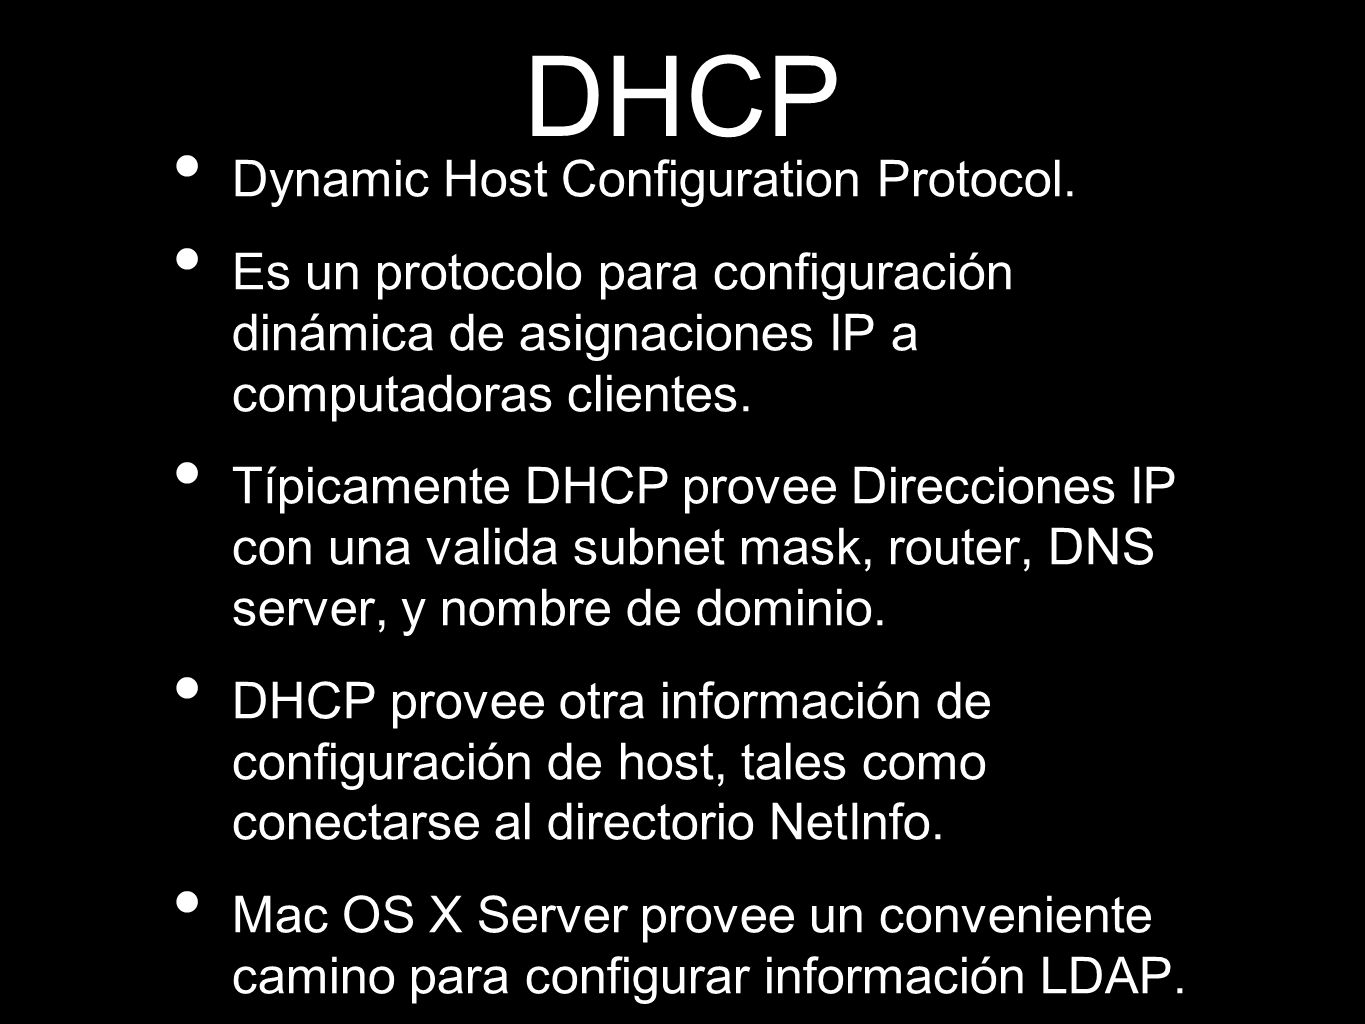 DHCP Dynamic Host Configuration Protocol.